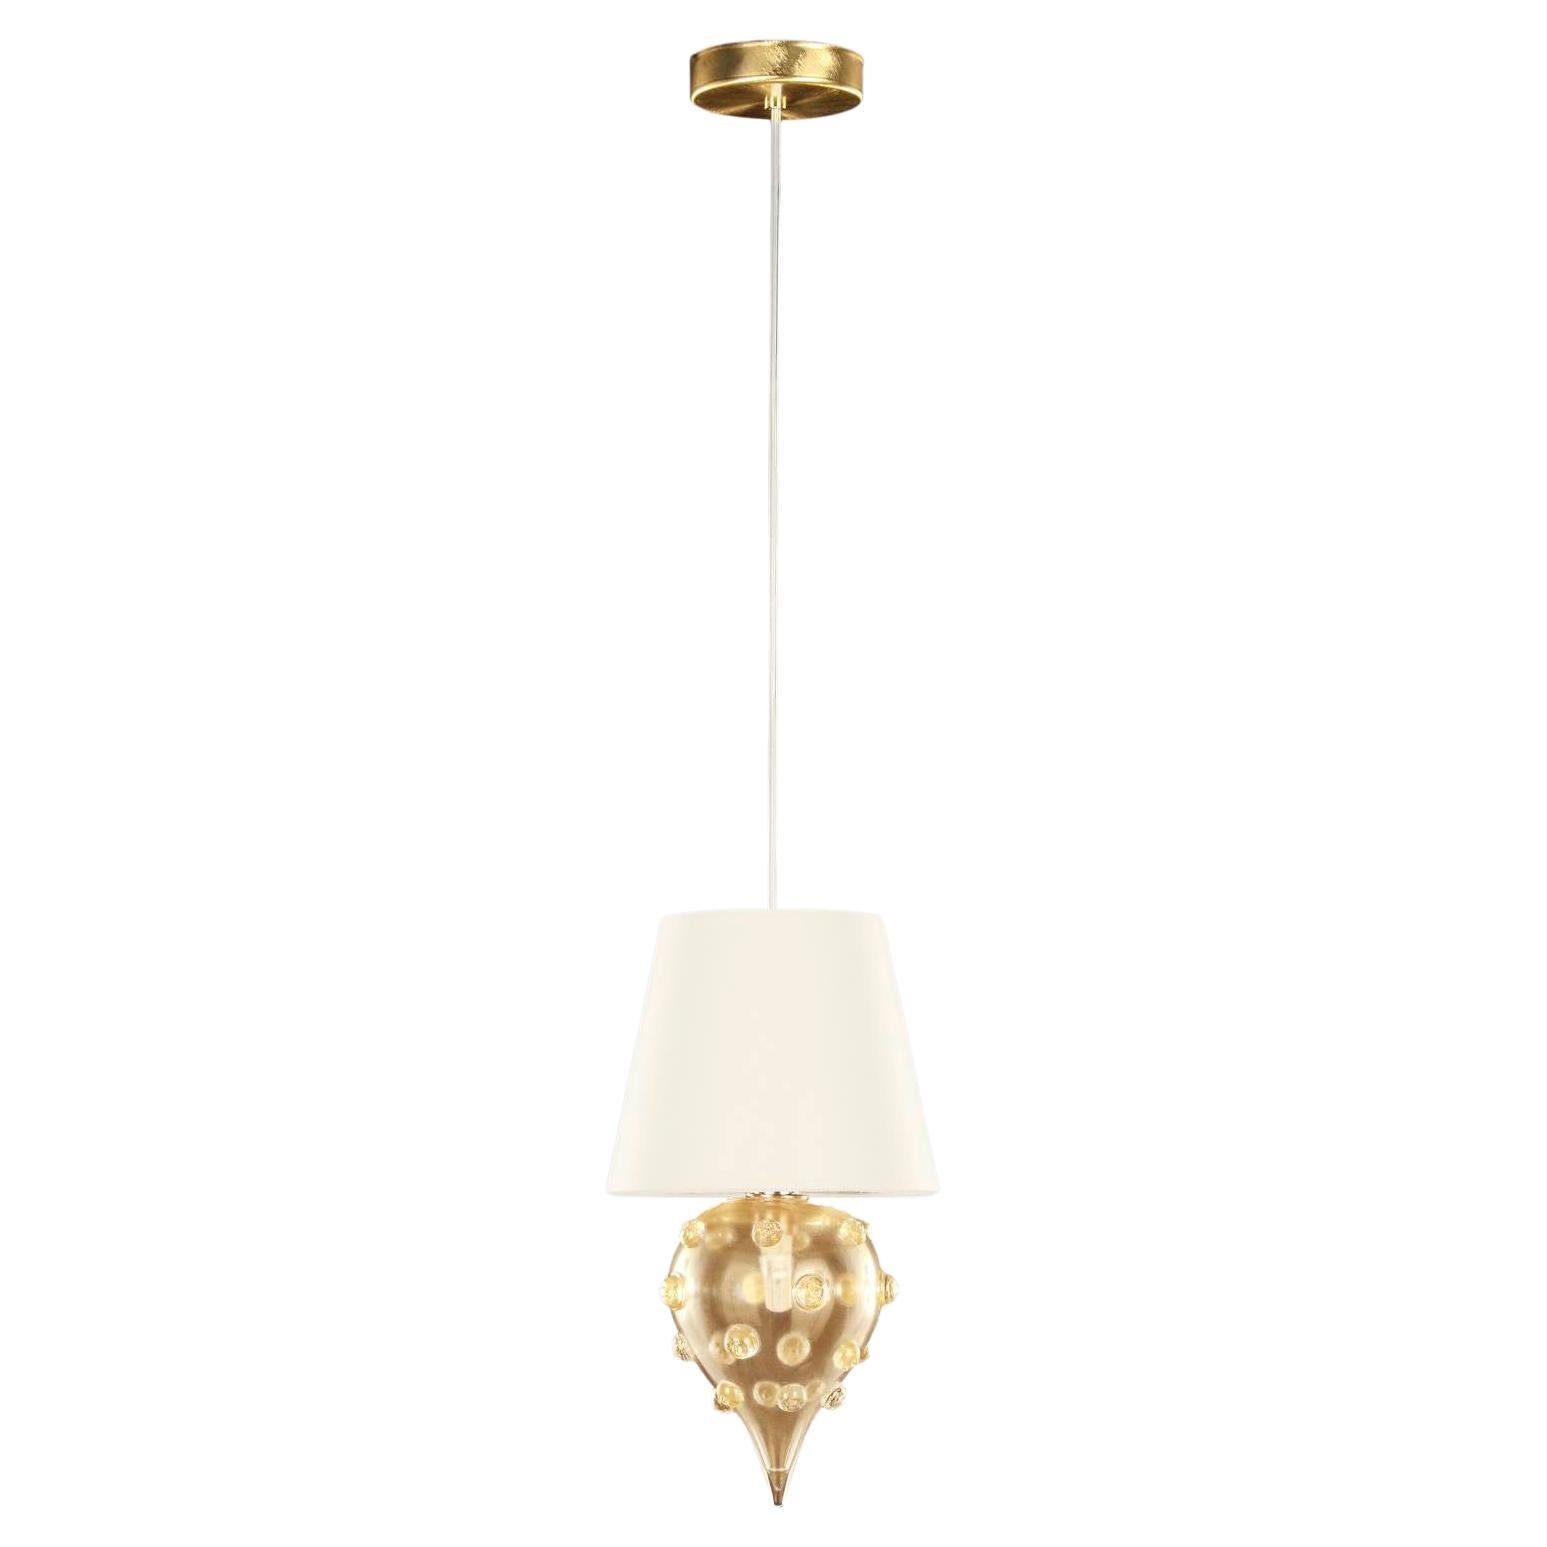 Artistic Suspension 1 Light, Golden Leaf Glass, Ivory Lampshade by Multiforme